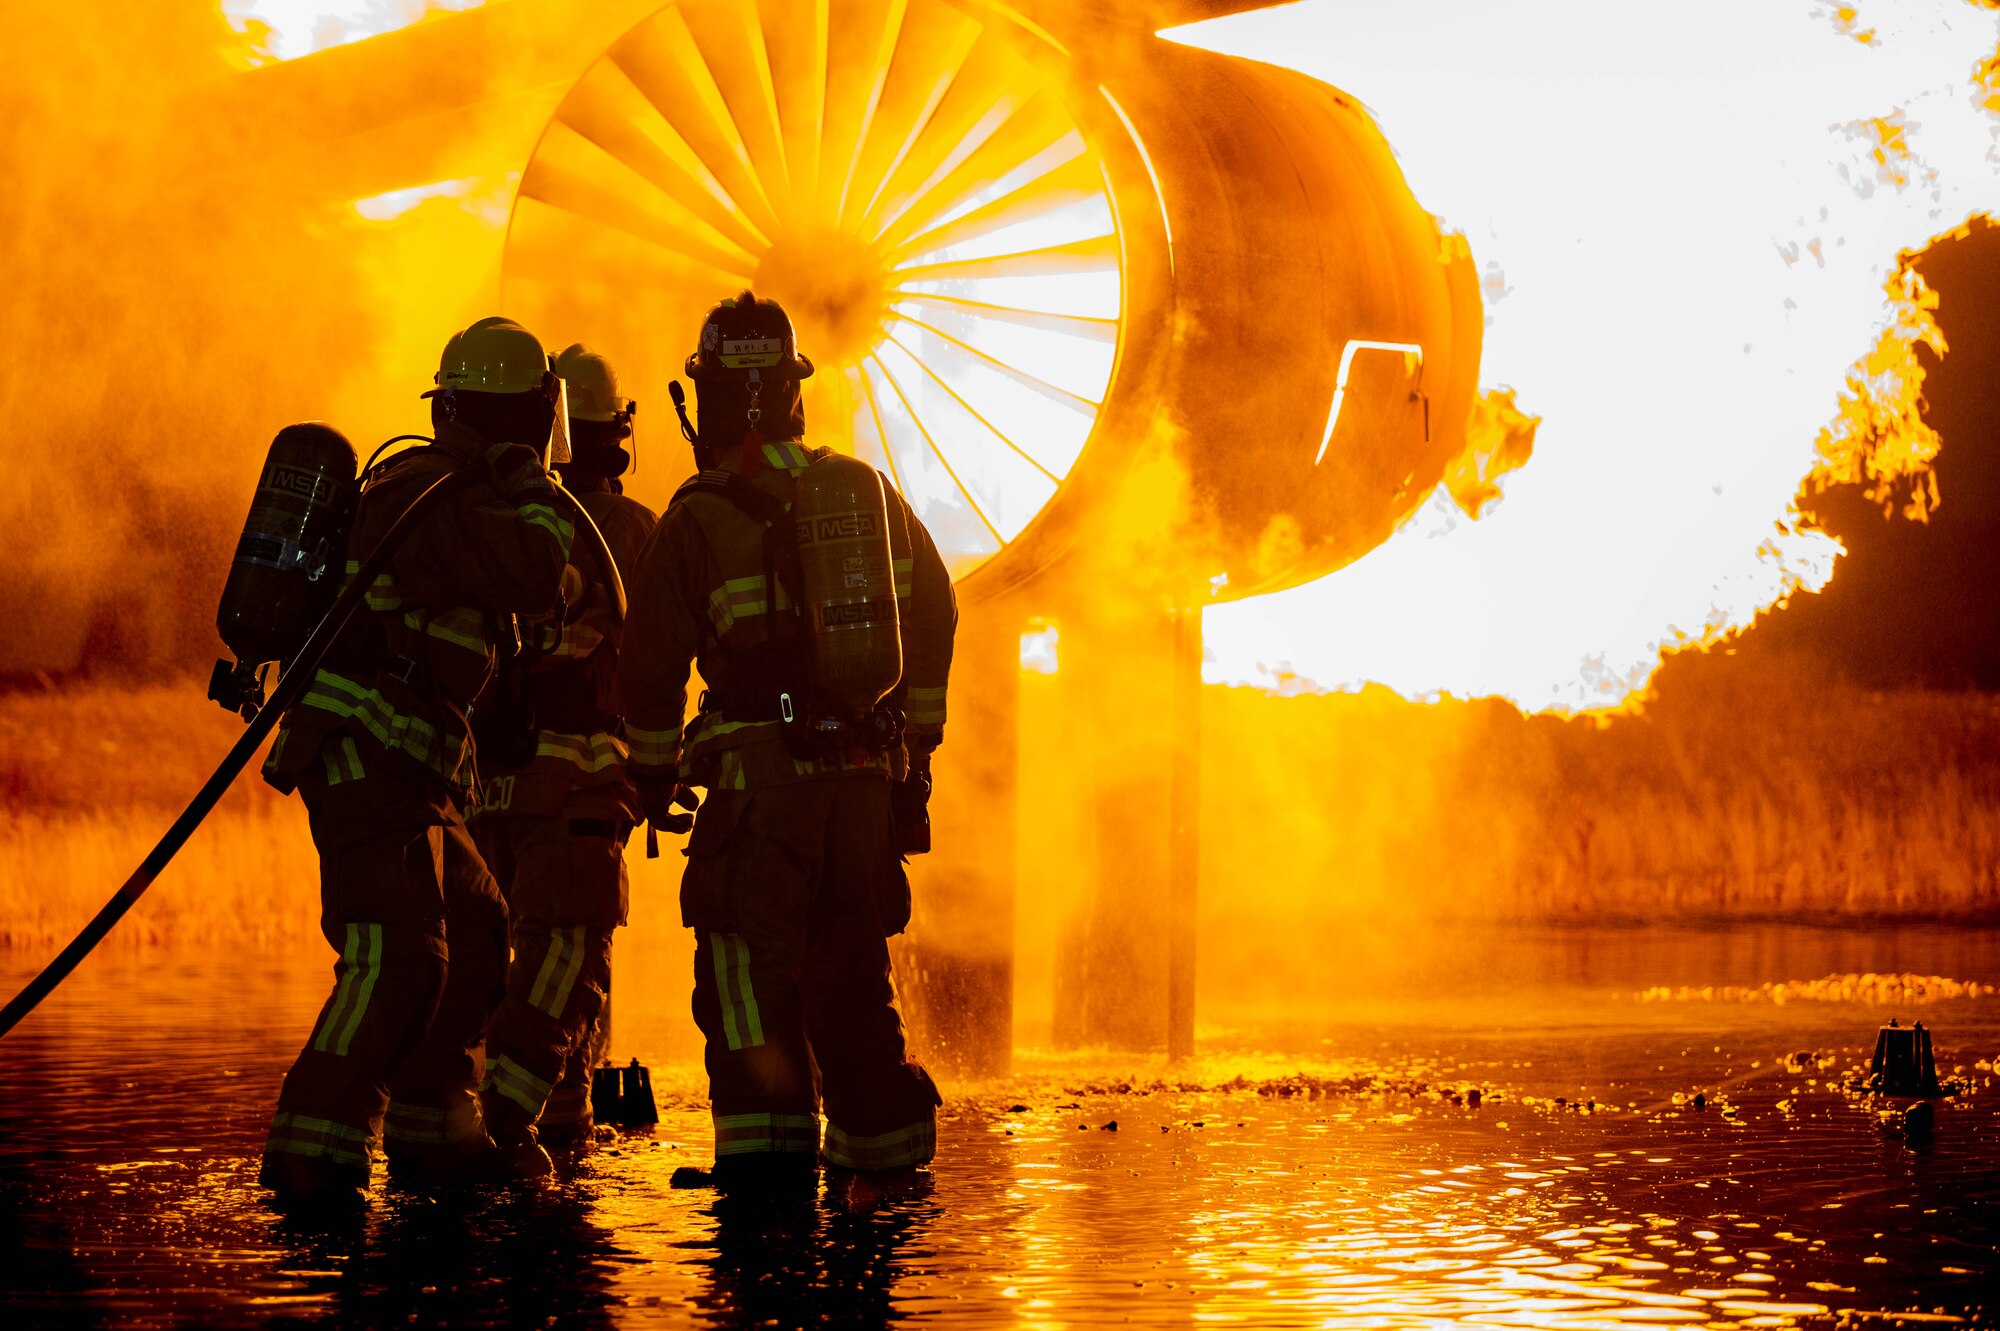 A group of 5th Civil Engineer Squadron fire protection specialists extinguish an ongoing fire during a live jet fire exercise at Minot Air Force Base, North Dakota, Aug. 21, 2023. These military firefighters protect people, property, and the environment from fires and disasters. (U.S. Air Force photo by Airman 1st Class Alexander Nottingham)